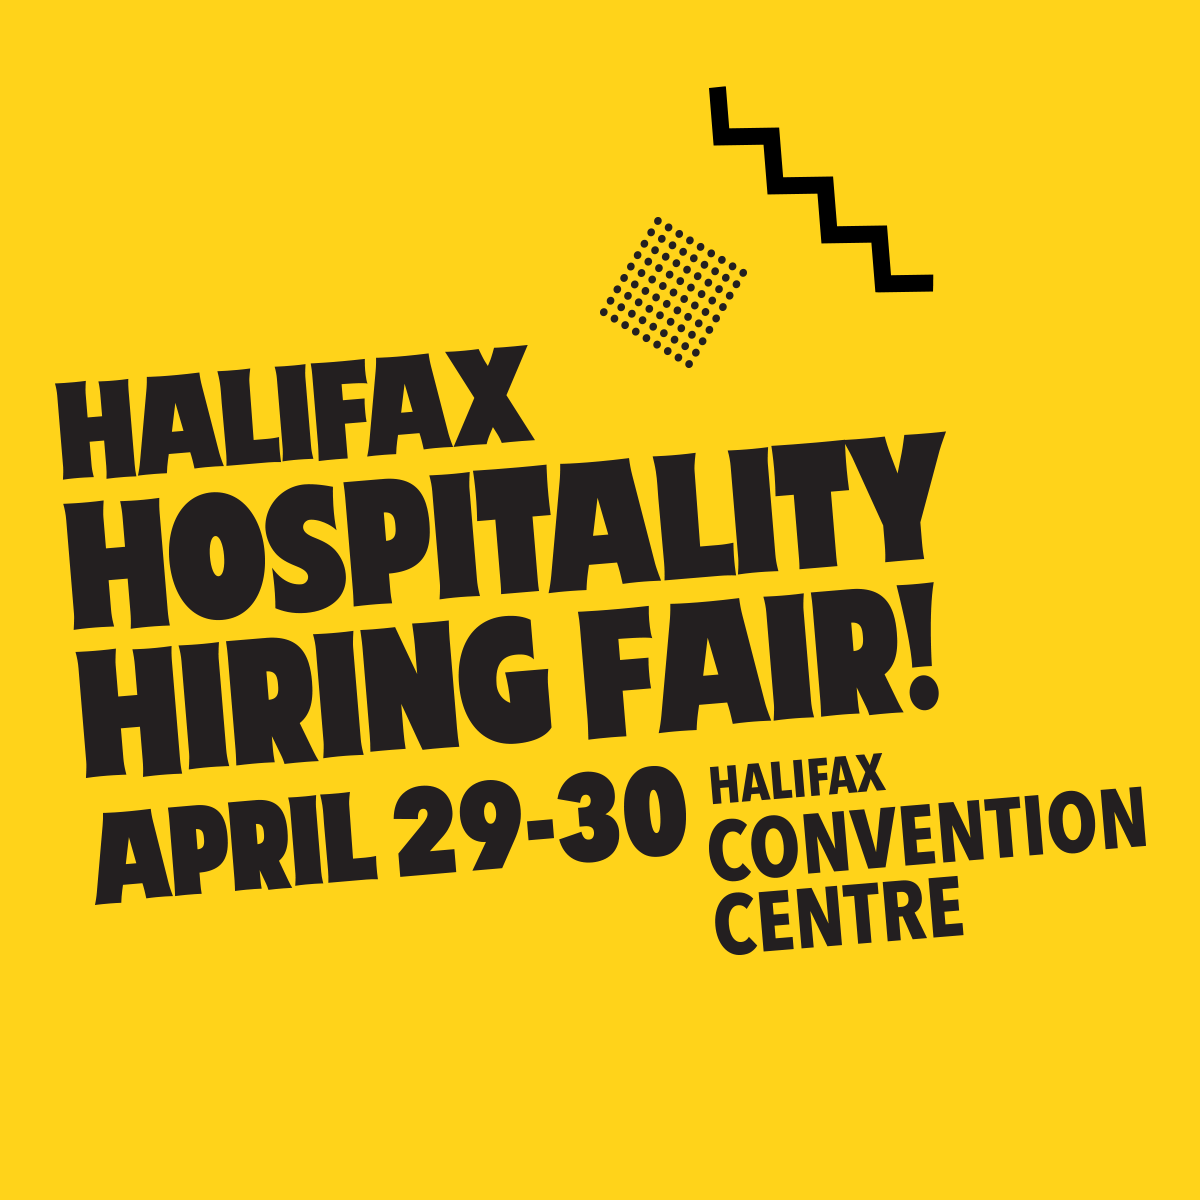 Yellow background. Text reads Halifax Hospitality Hiring Fair April 29-30 Halifax Convention Centre